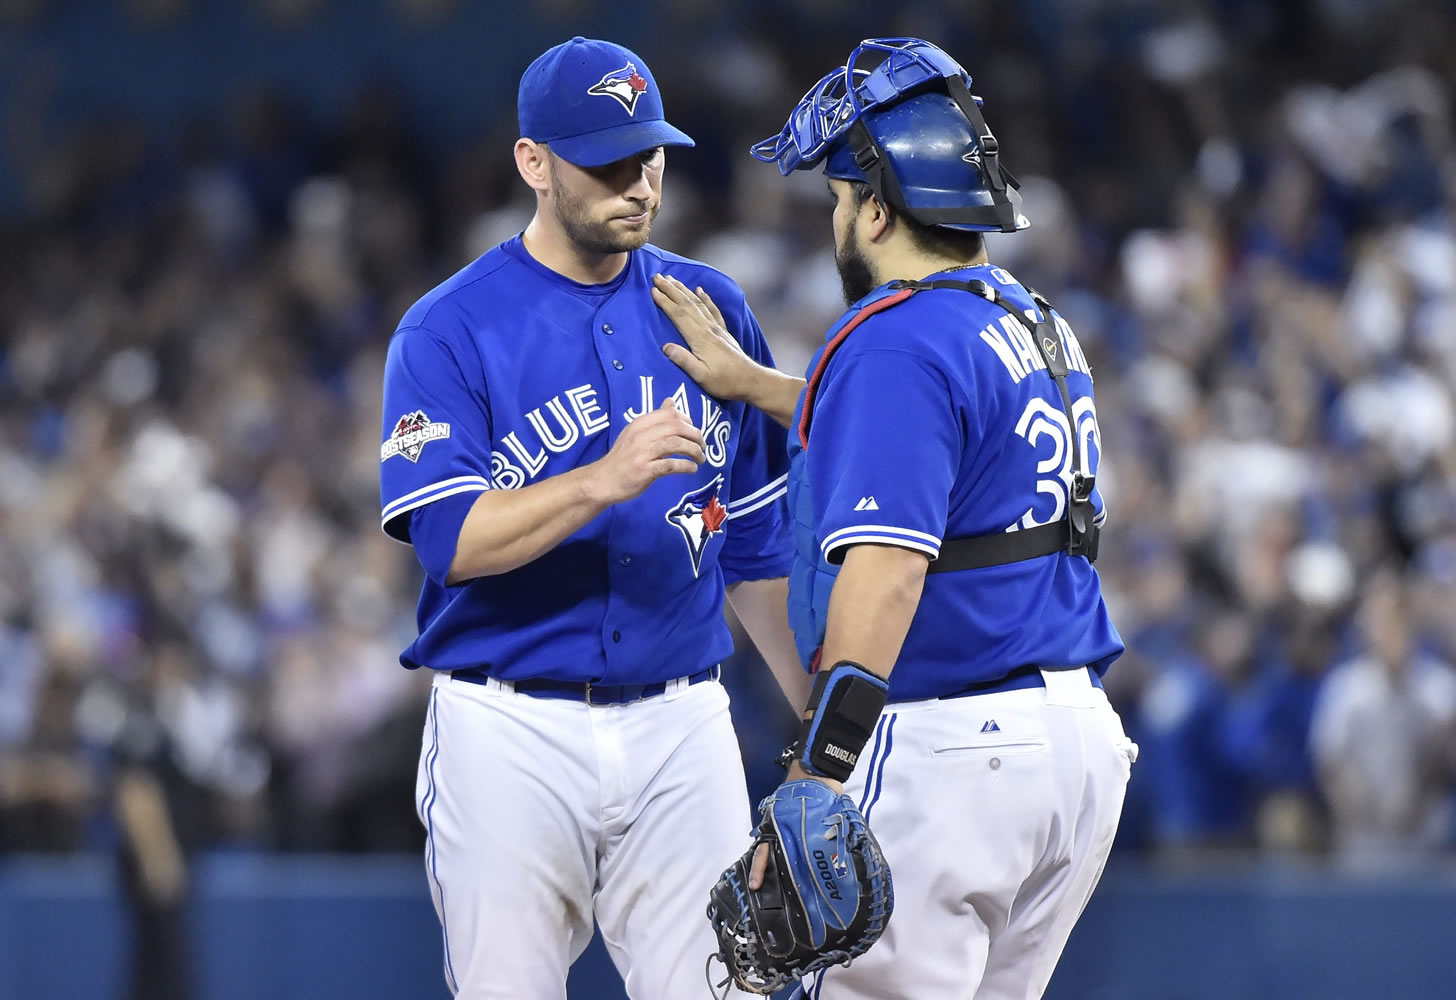 Toronto Blue Jays'  starting pitcher Marco Estrada is congratulated by catcher Dioner Navarro after being pulled from the game against the Kansas City Royals during the eighth inning in Game 5 of baseball's American League Championship Series on Wednesday, Oct. 21, 2015, in Toronto.